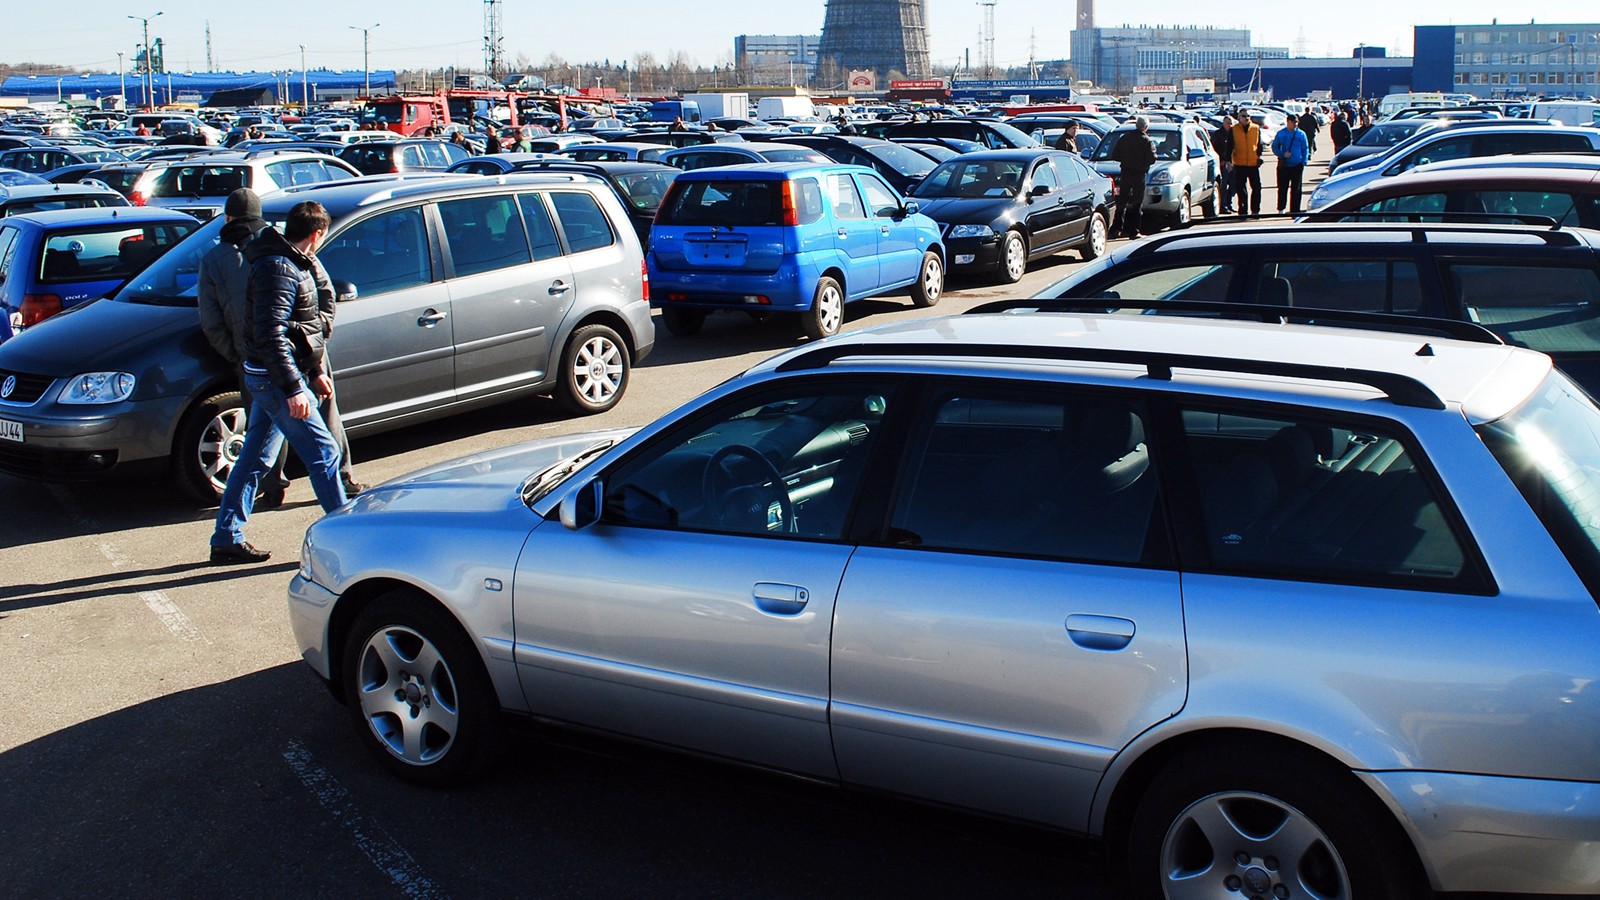 Market of second hand used cars in Kaunas city